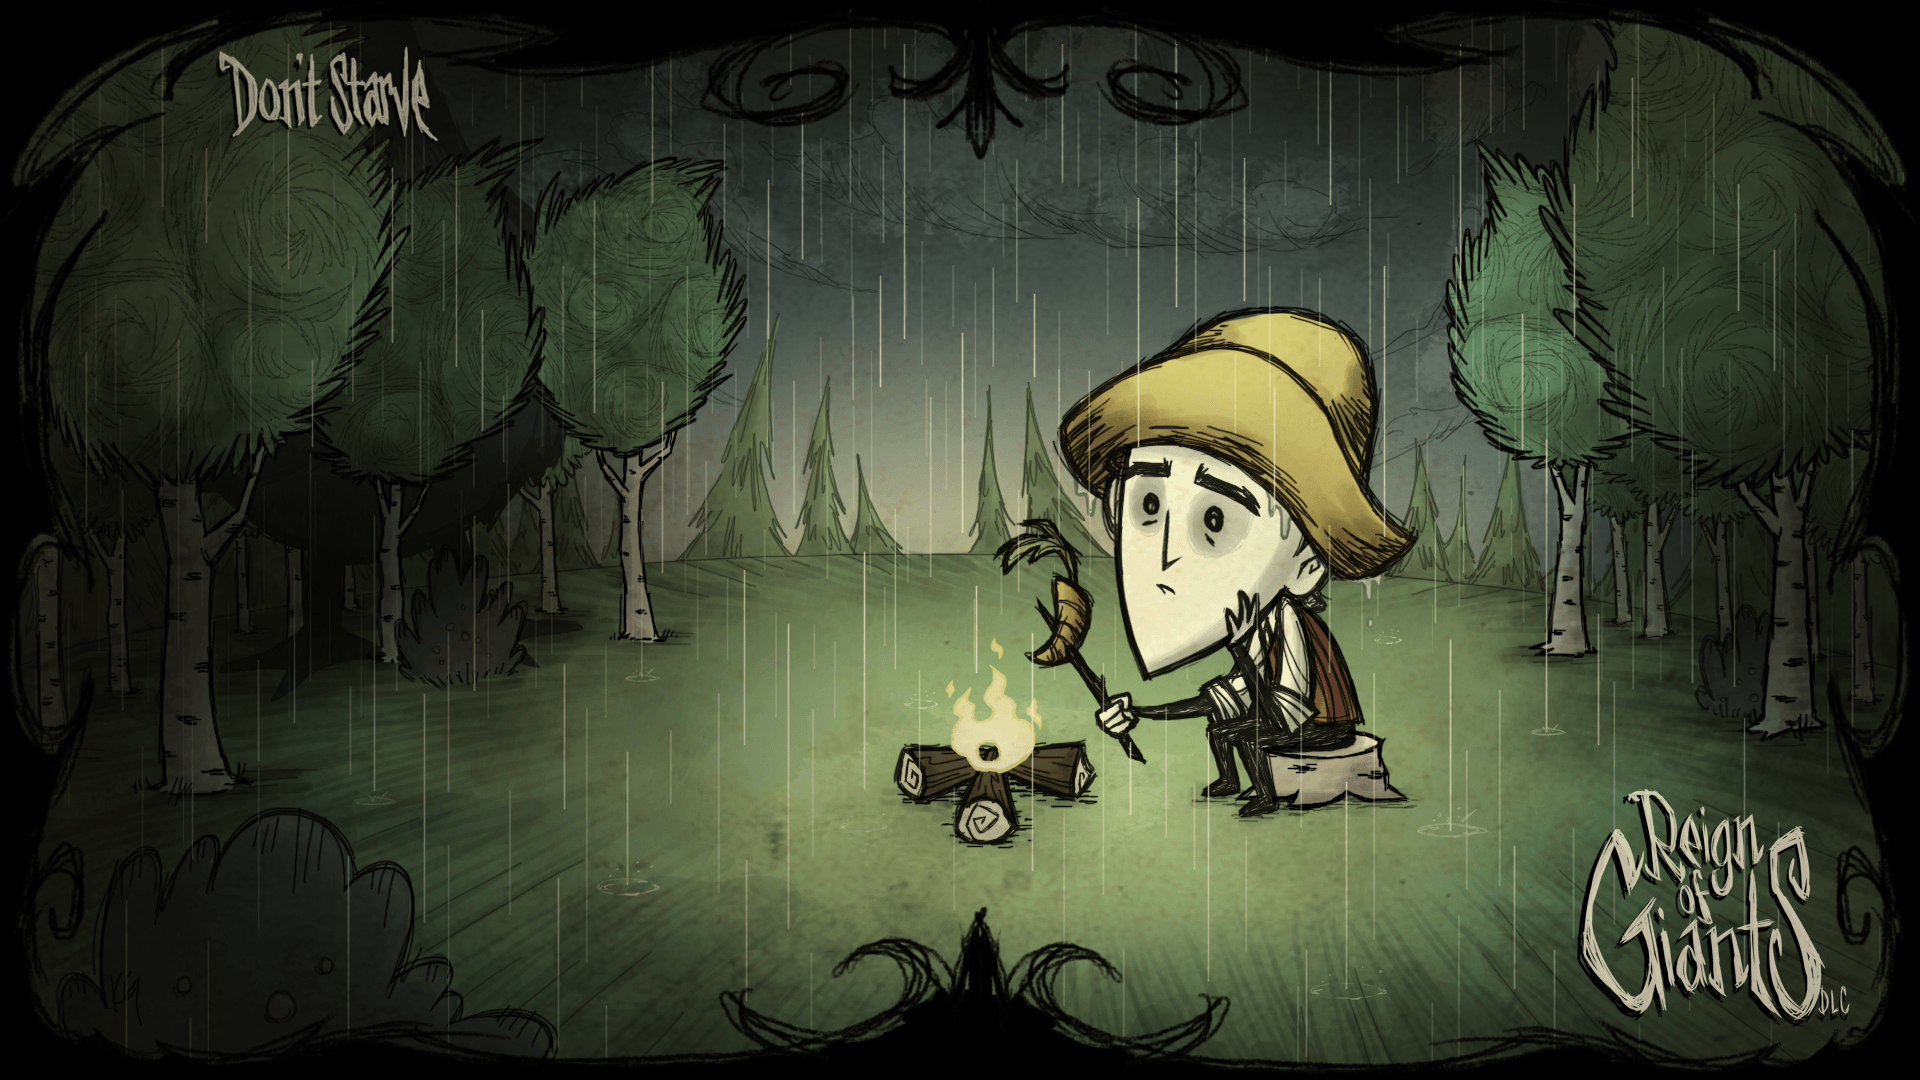 Animated one of the Don't Starve Wallpapers!